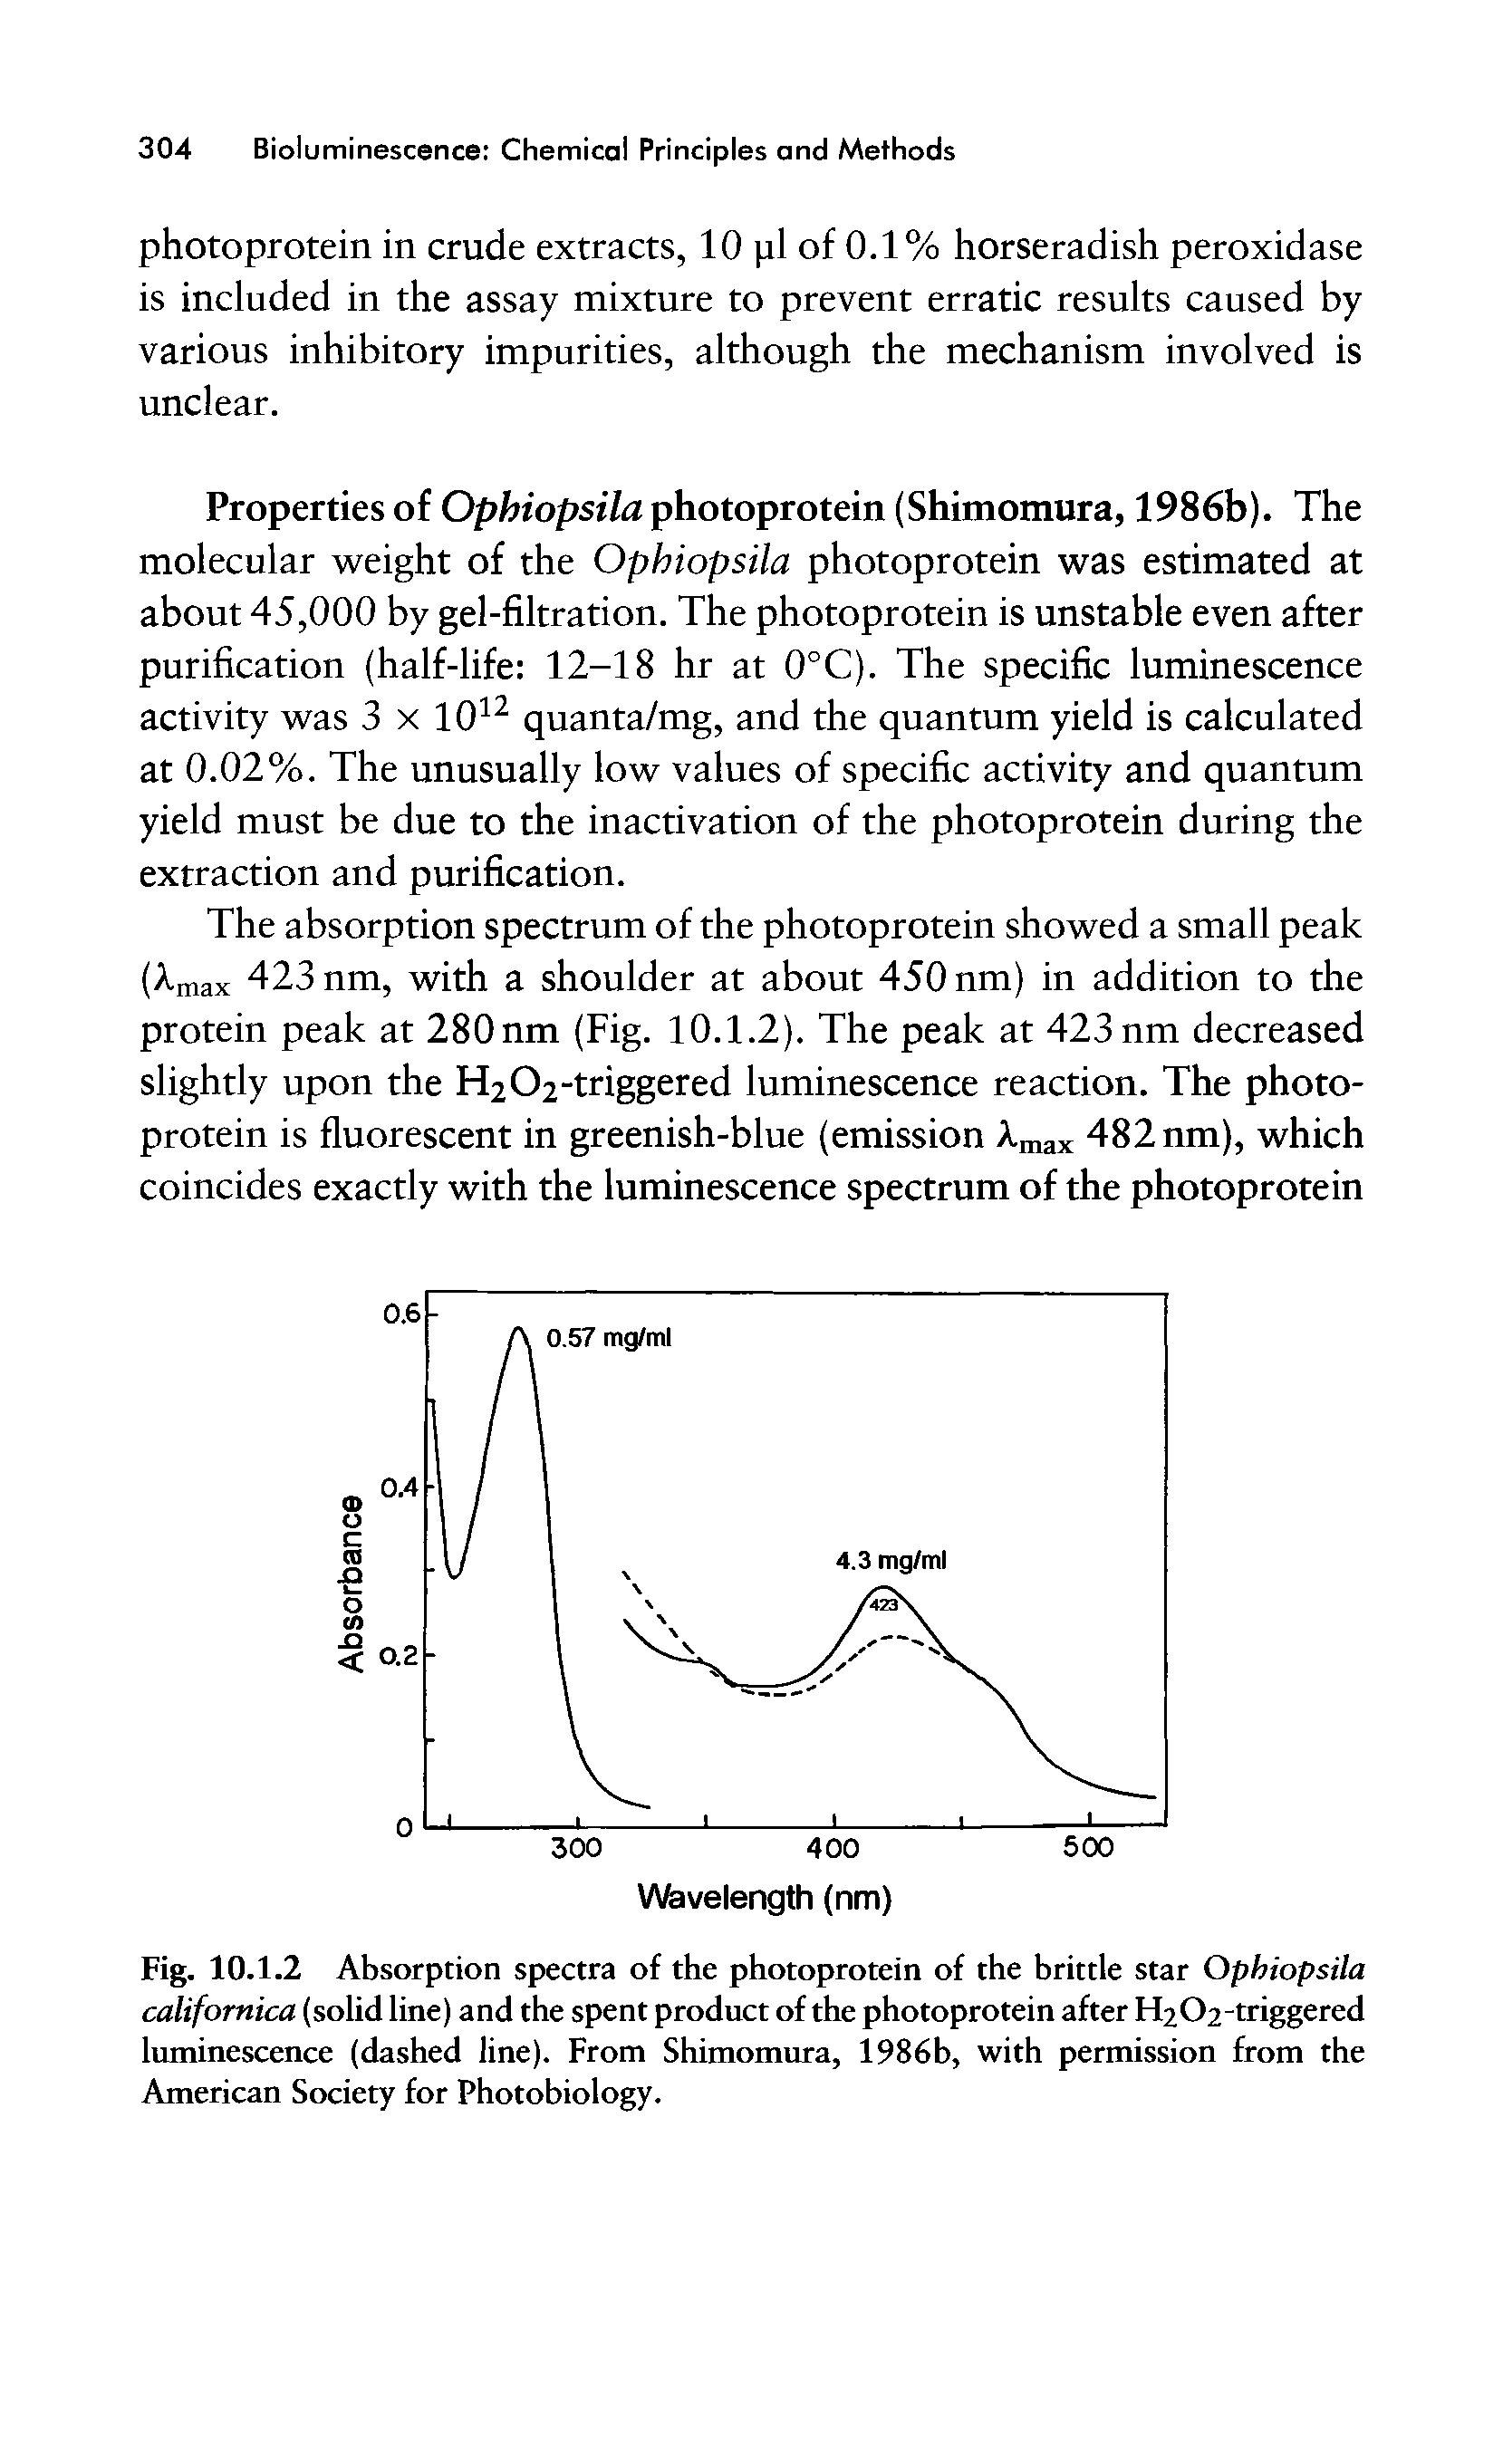 Fig. 10.1.2 Absorption spectra of the photoprotein of the brittle star Ophiopsila calif omica (solid line) and the spent product of the photoprotein after H2O2-triggered luminescence (dashed line). From Shimomura, 1986b, with permission from the American Society for Photobiology.